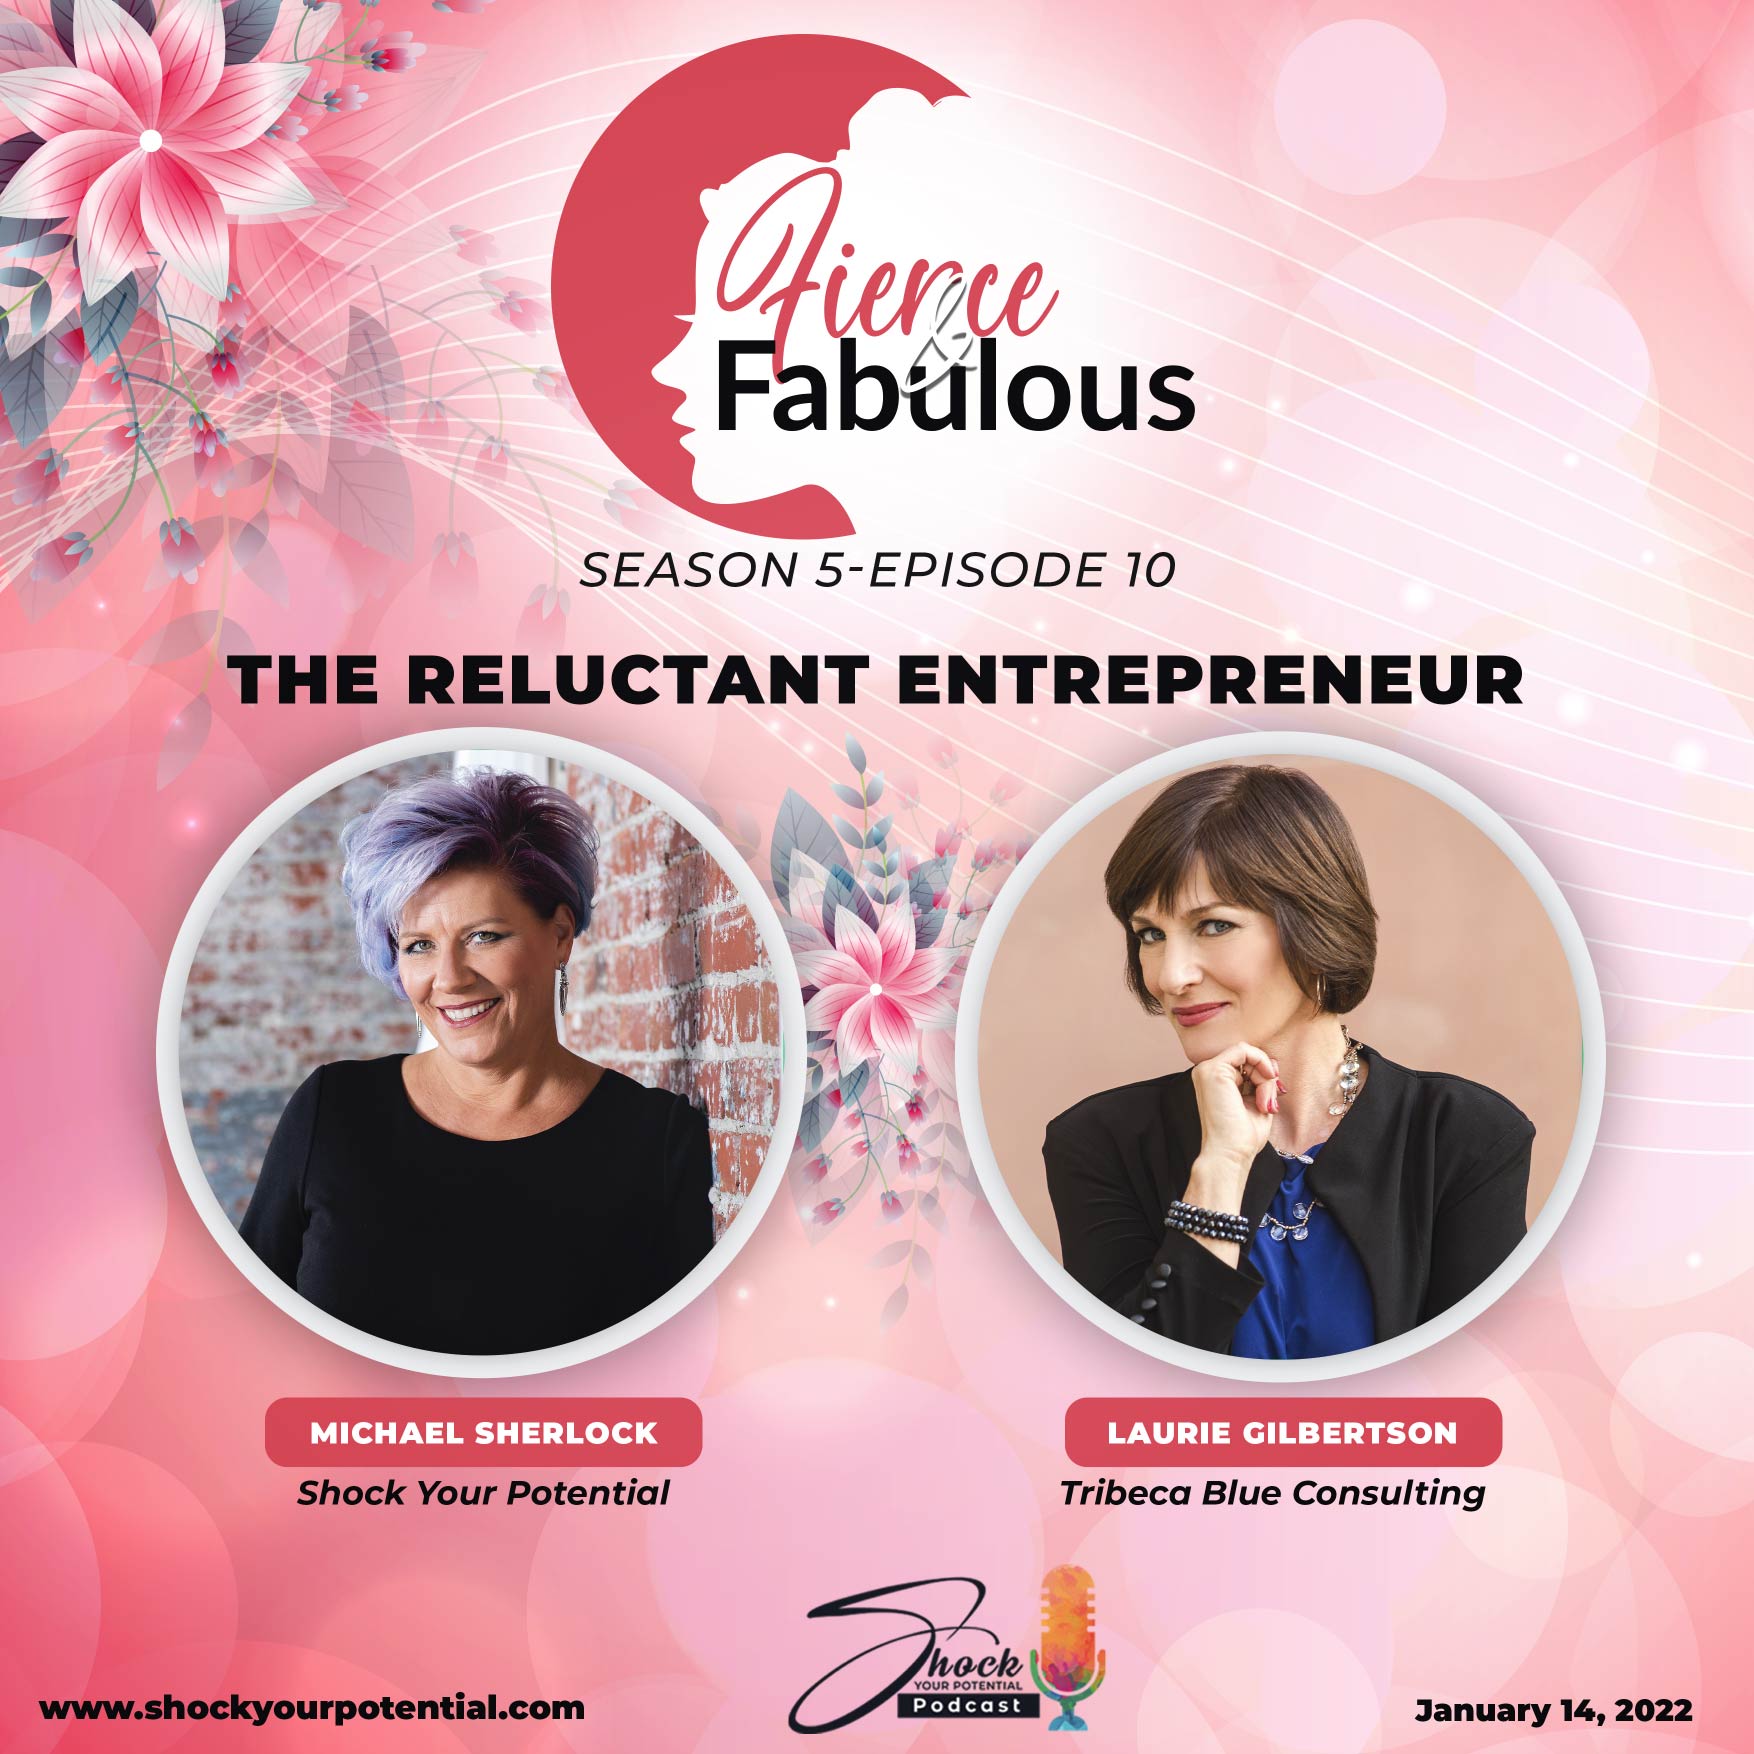 The Reluctant Entrepreneur – Laurie Gilbertson